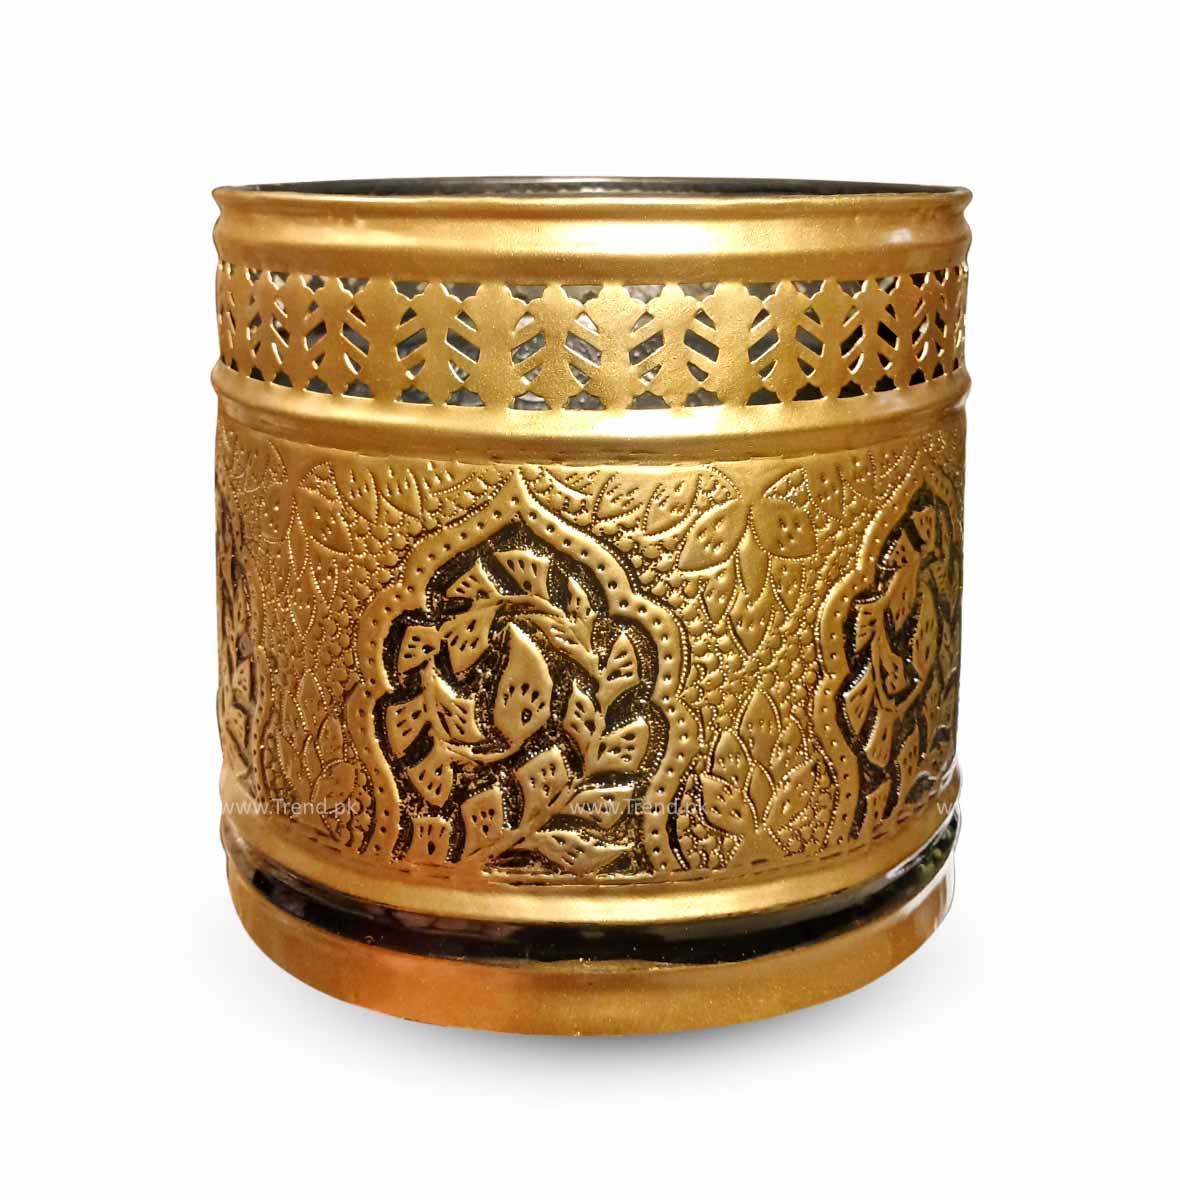 Golden hand made planters